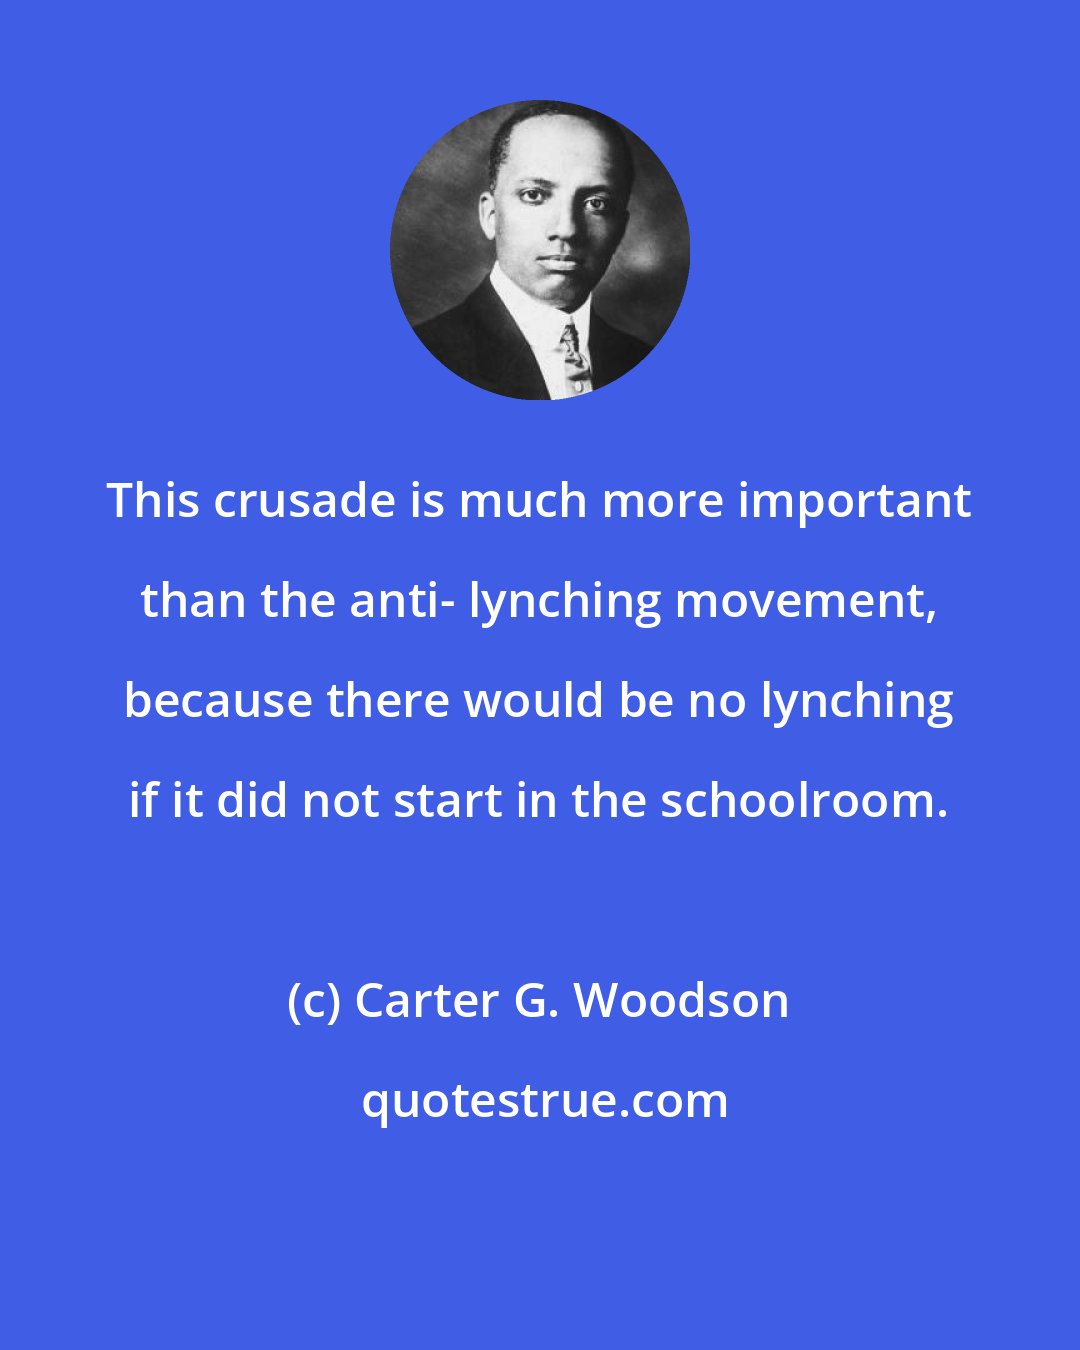 Carter G. Woodson: This crusade is much more important than the anti- lynching movement, because there would be no lynching if it did not start in the schoolroom.